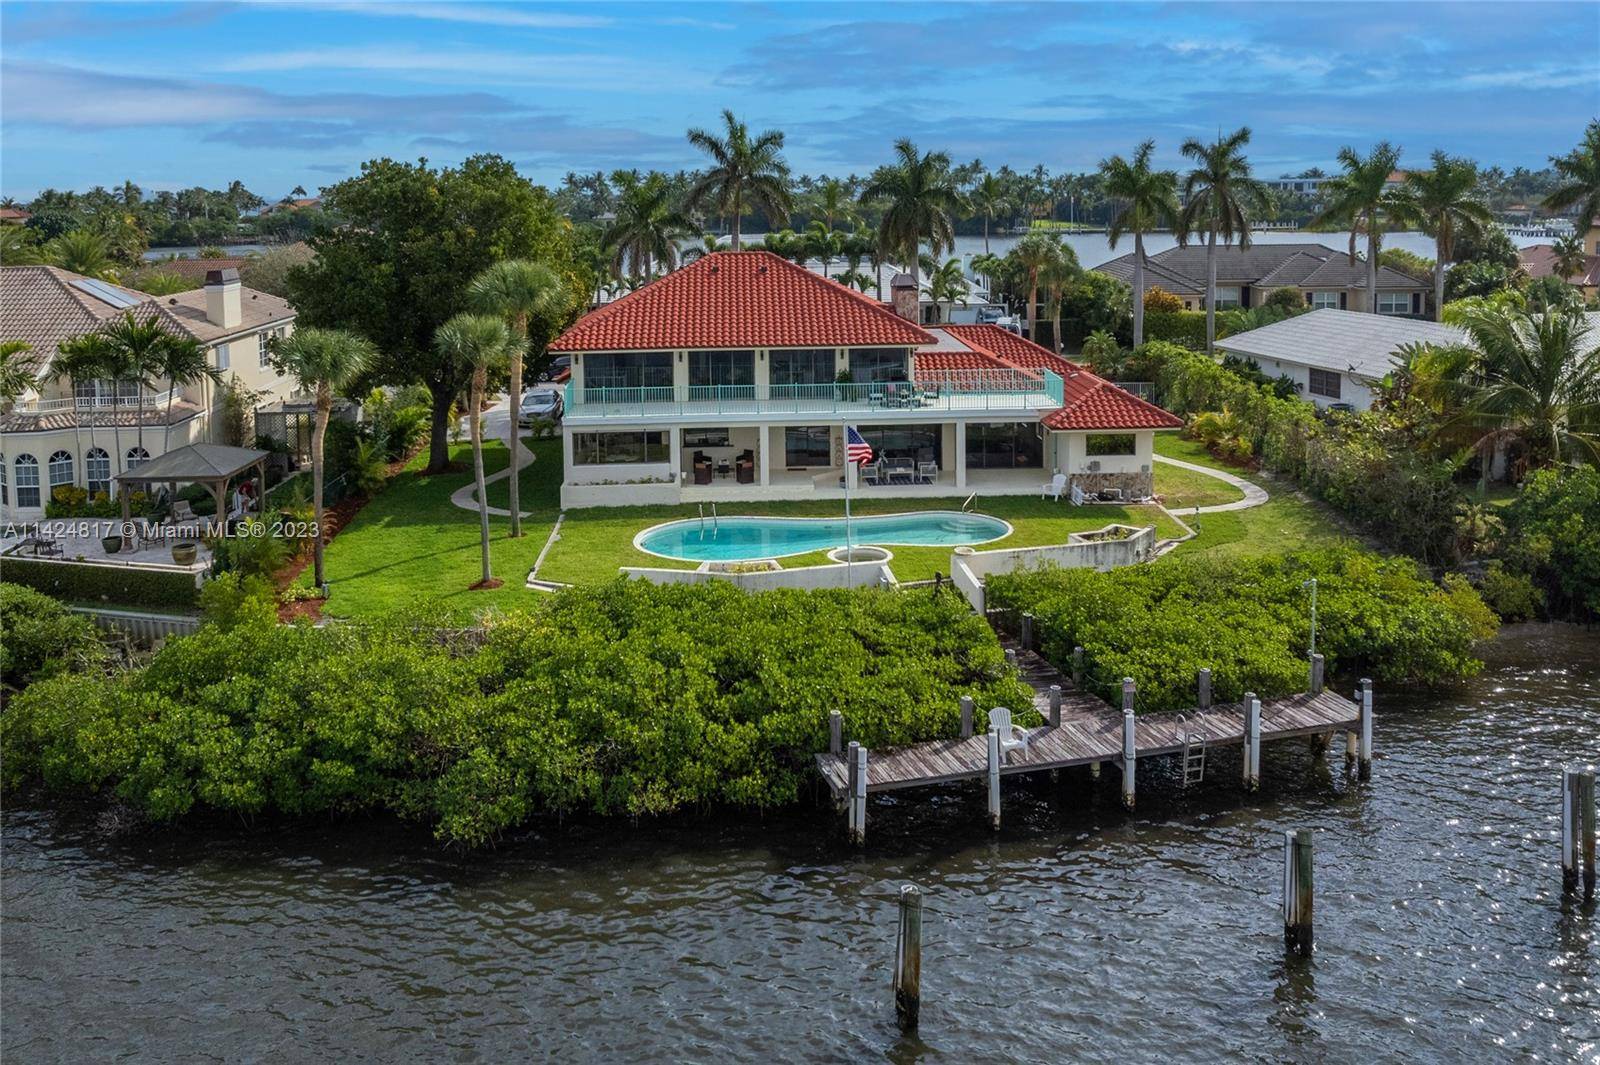 Seller will build with Top Developer for up to 9K sqft with Purchase Price renderings in photos Manalapan, The most exclusive Island In Palm Beach once Home owned by the ...